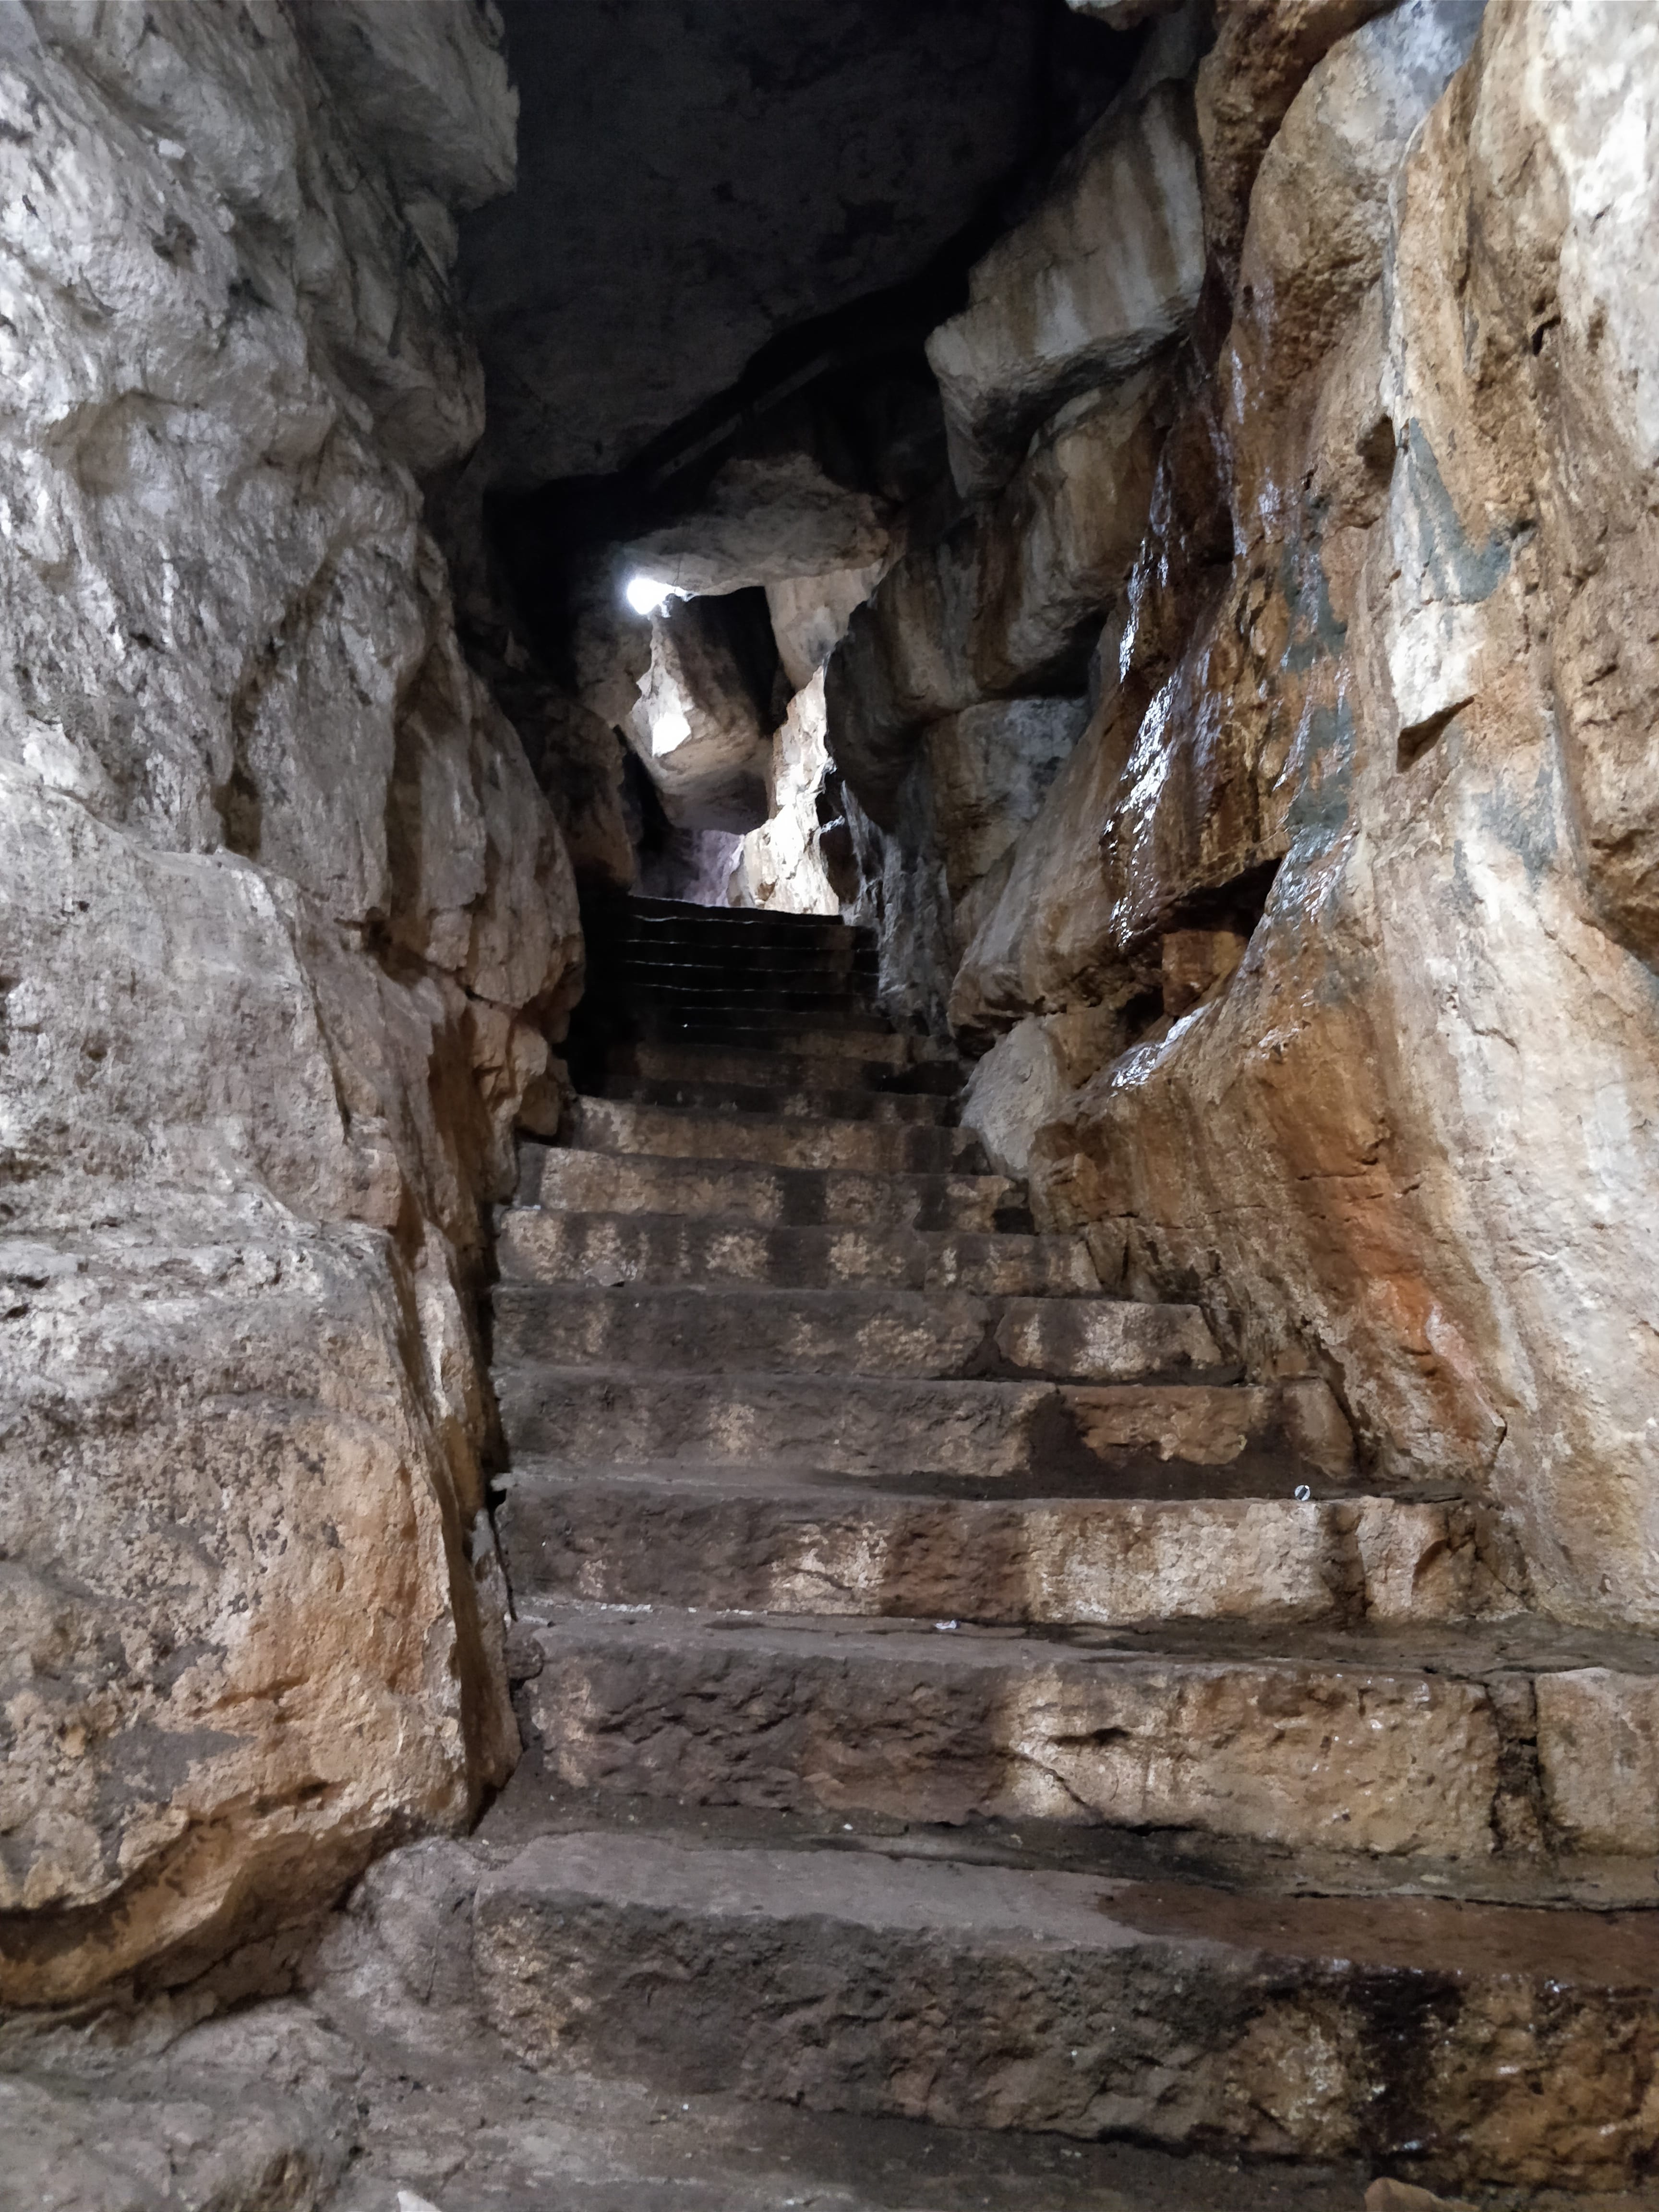 Stone steps chiseled into the rocks. Cave like passage to go to the bottom of Gokak falls